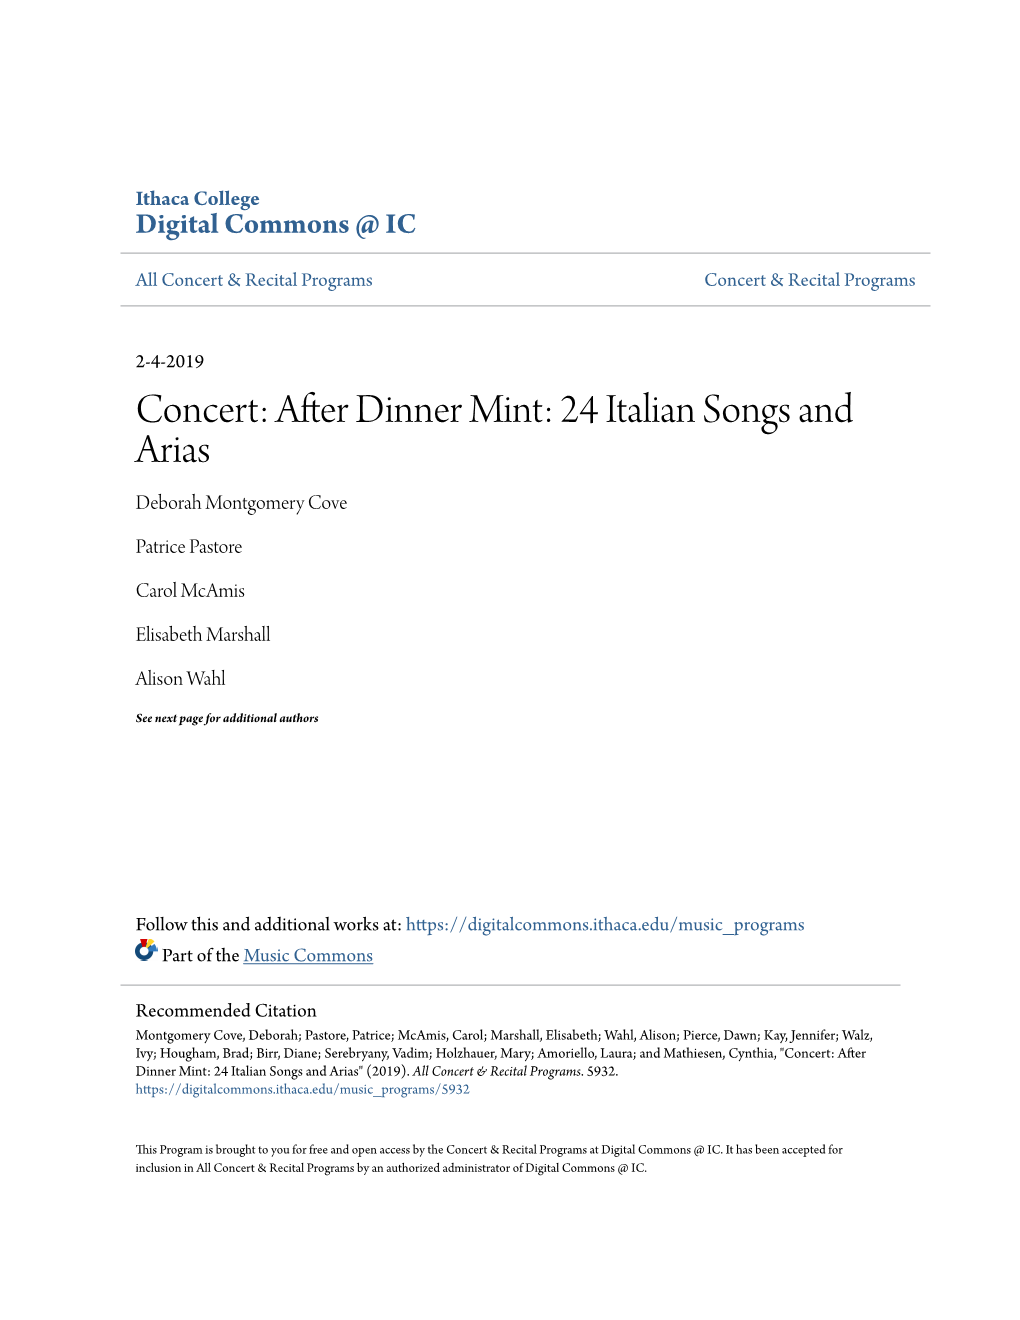 Concert: After Dinner Mint: 24 Italian Songs and Arias Deborah Montgomery Cove